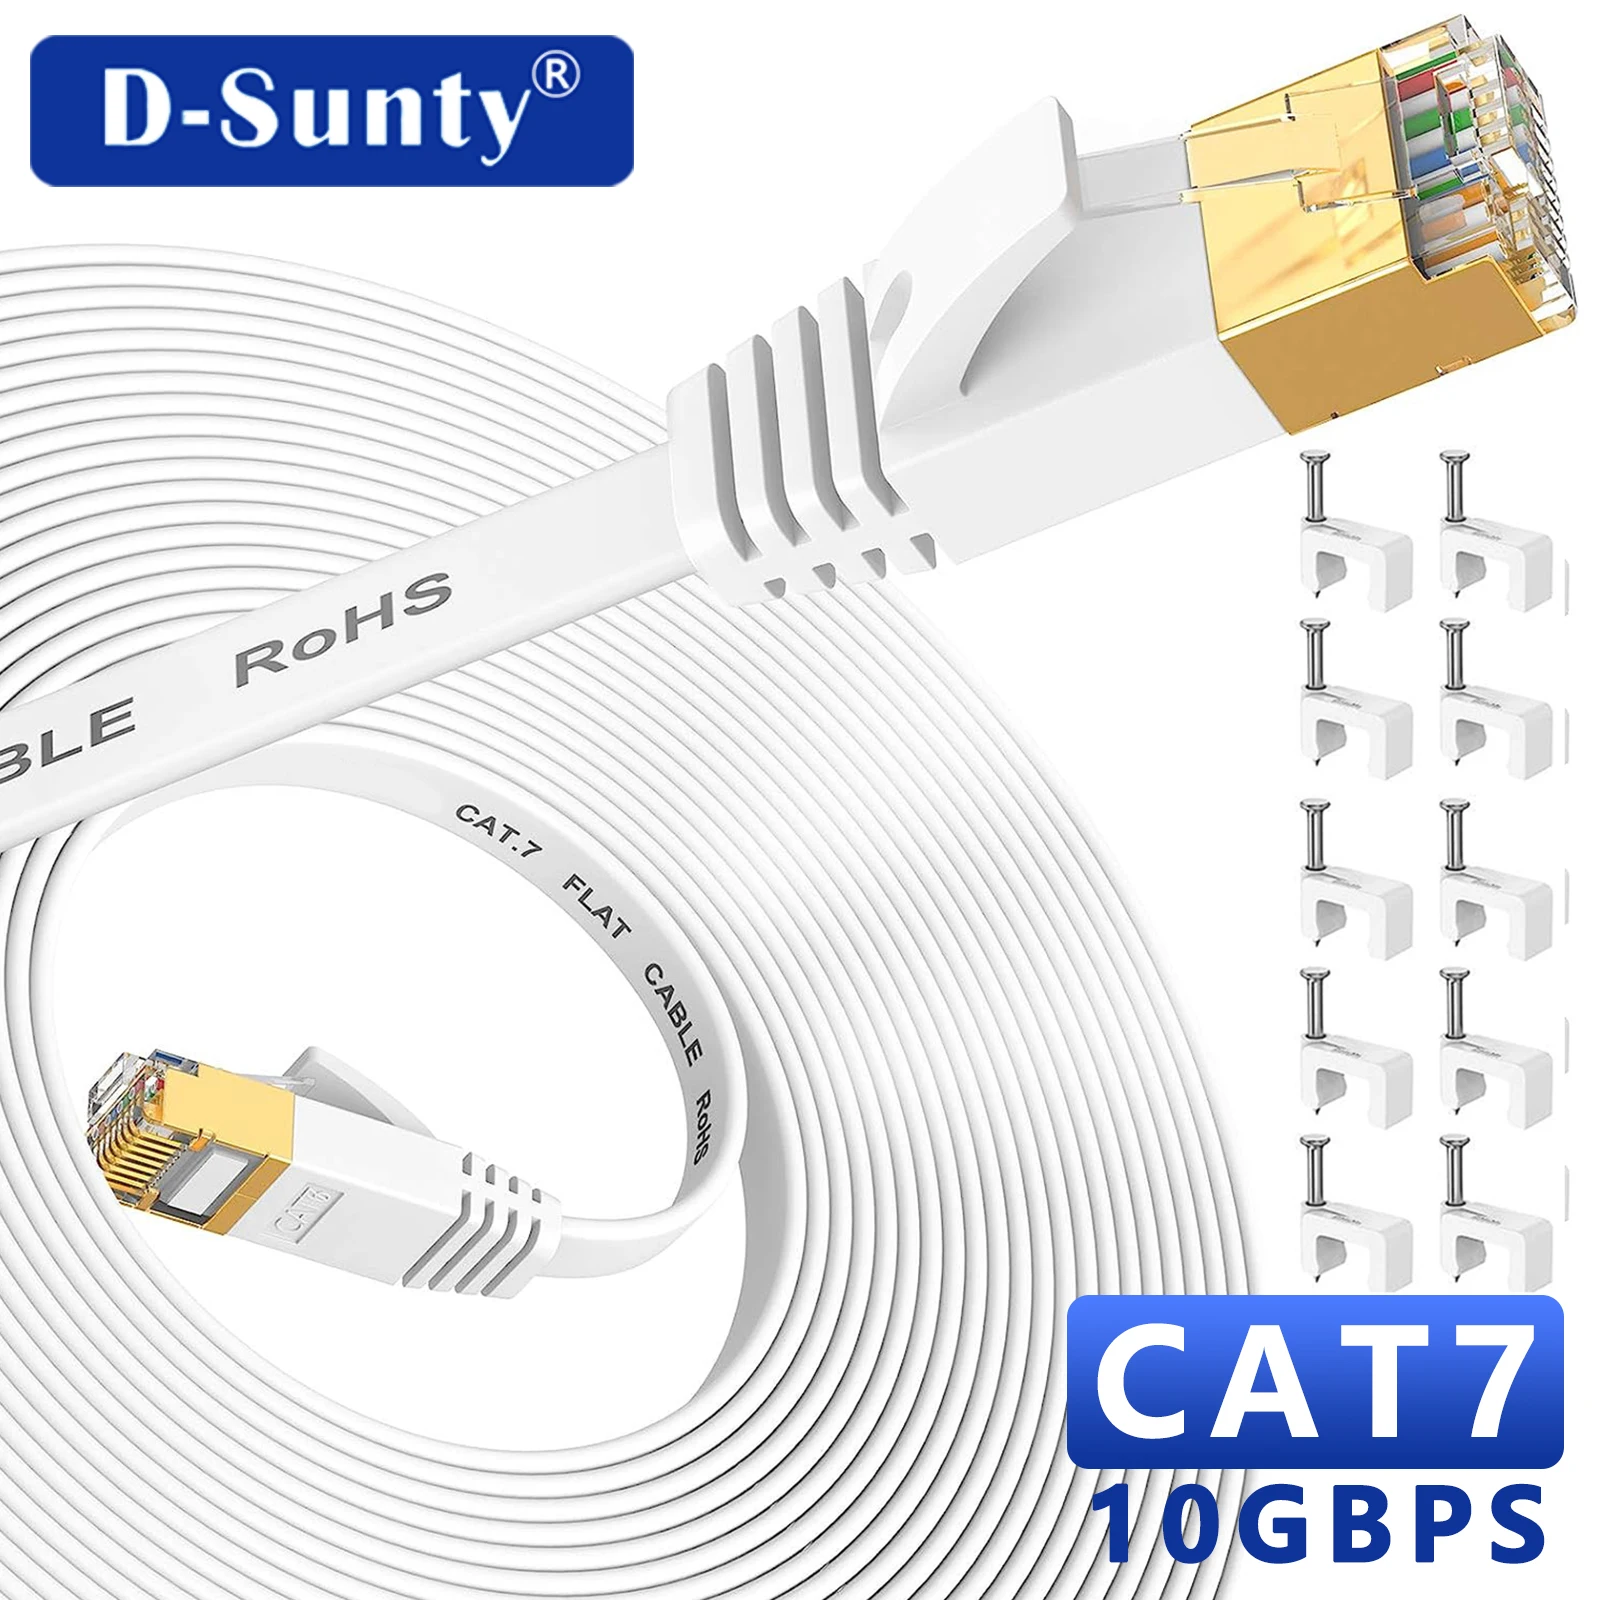 

Ethernet Cable Cat7 10Gbps Flat High Speed RJ45 Internet Network Cable 10m 20m 30m Patch Cord for Modem Router Cat 7 Lan Cable